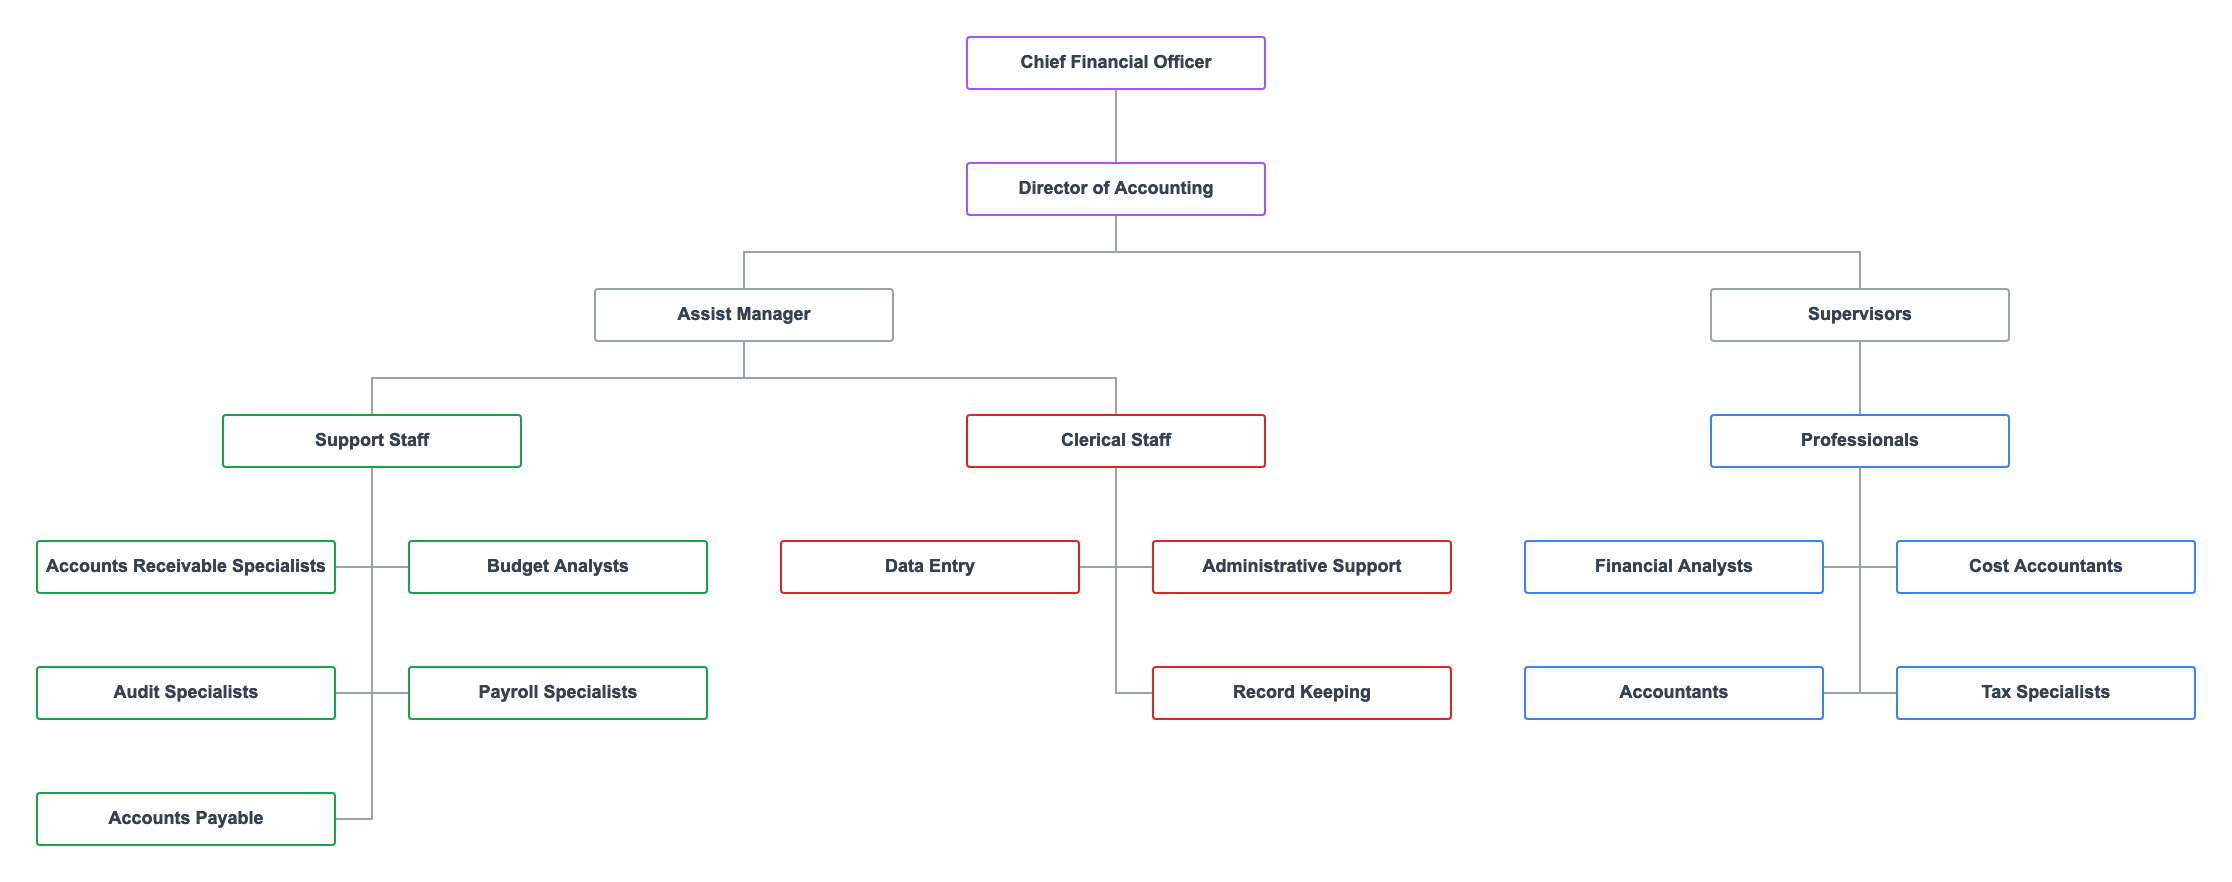 Accounting department structure